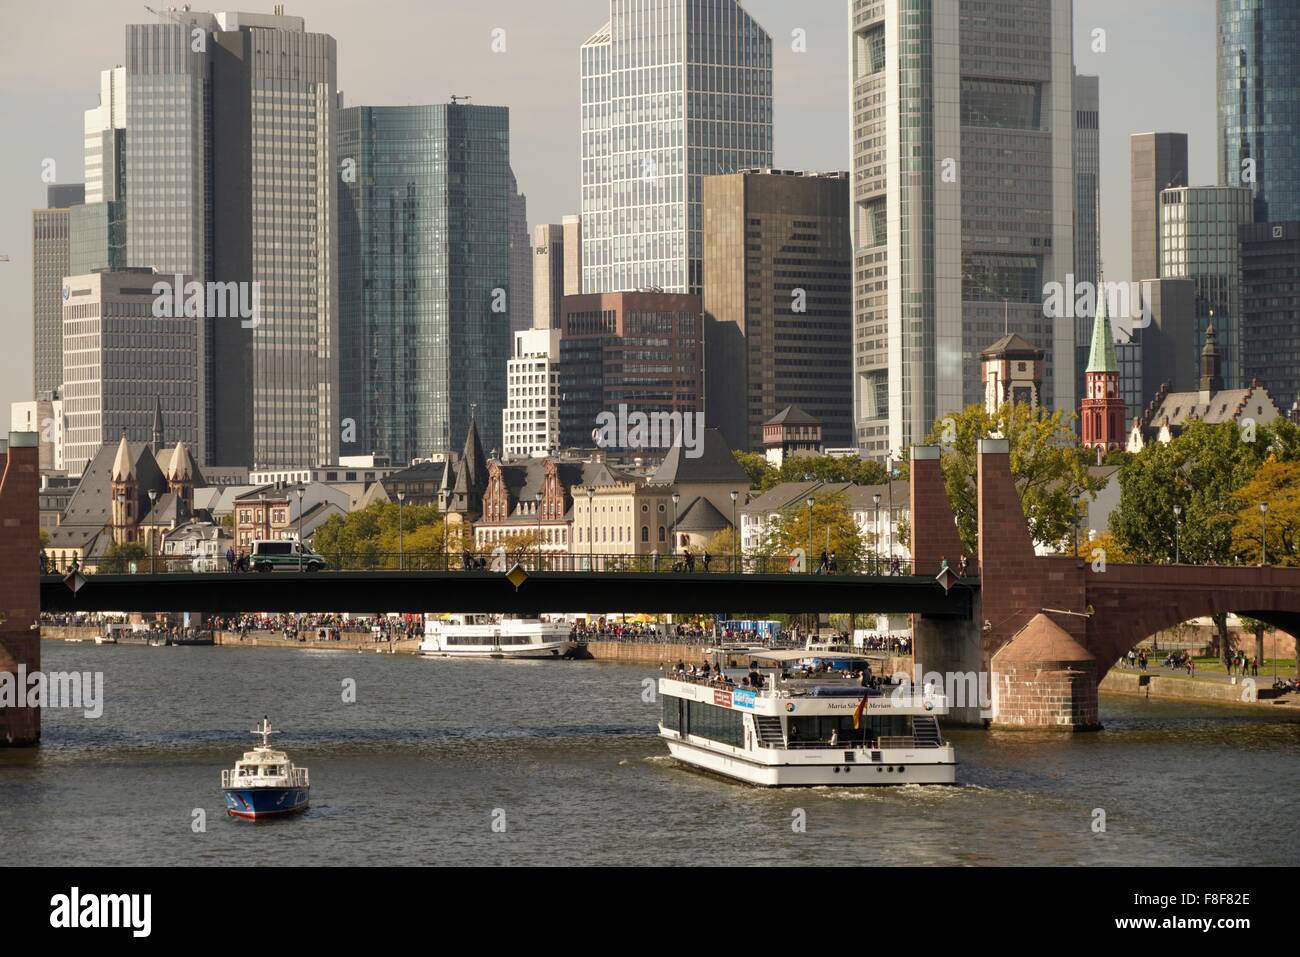 Cityscape with skyline, Financial District and Main, Frankfurt am Main, Hesse, Germany, Europe Stock Photo